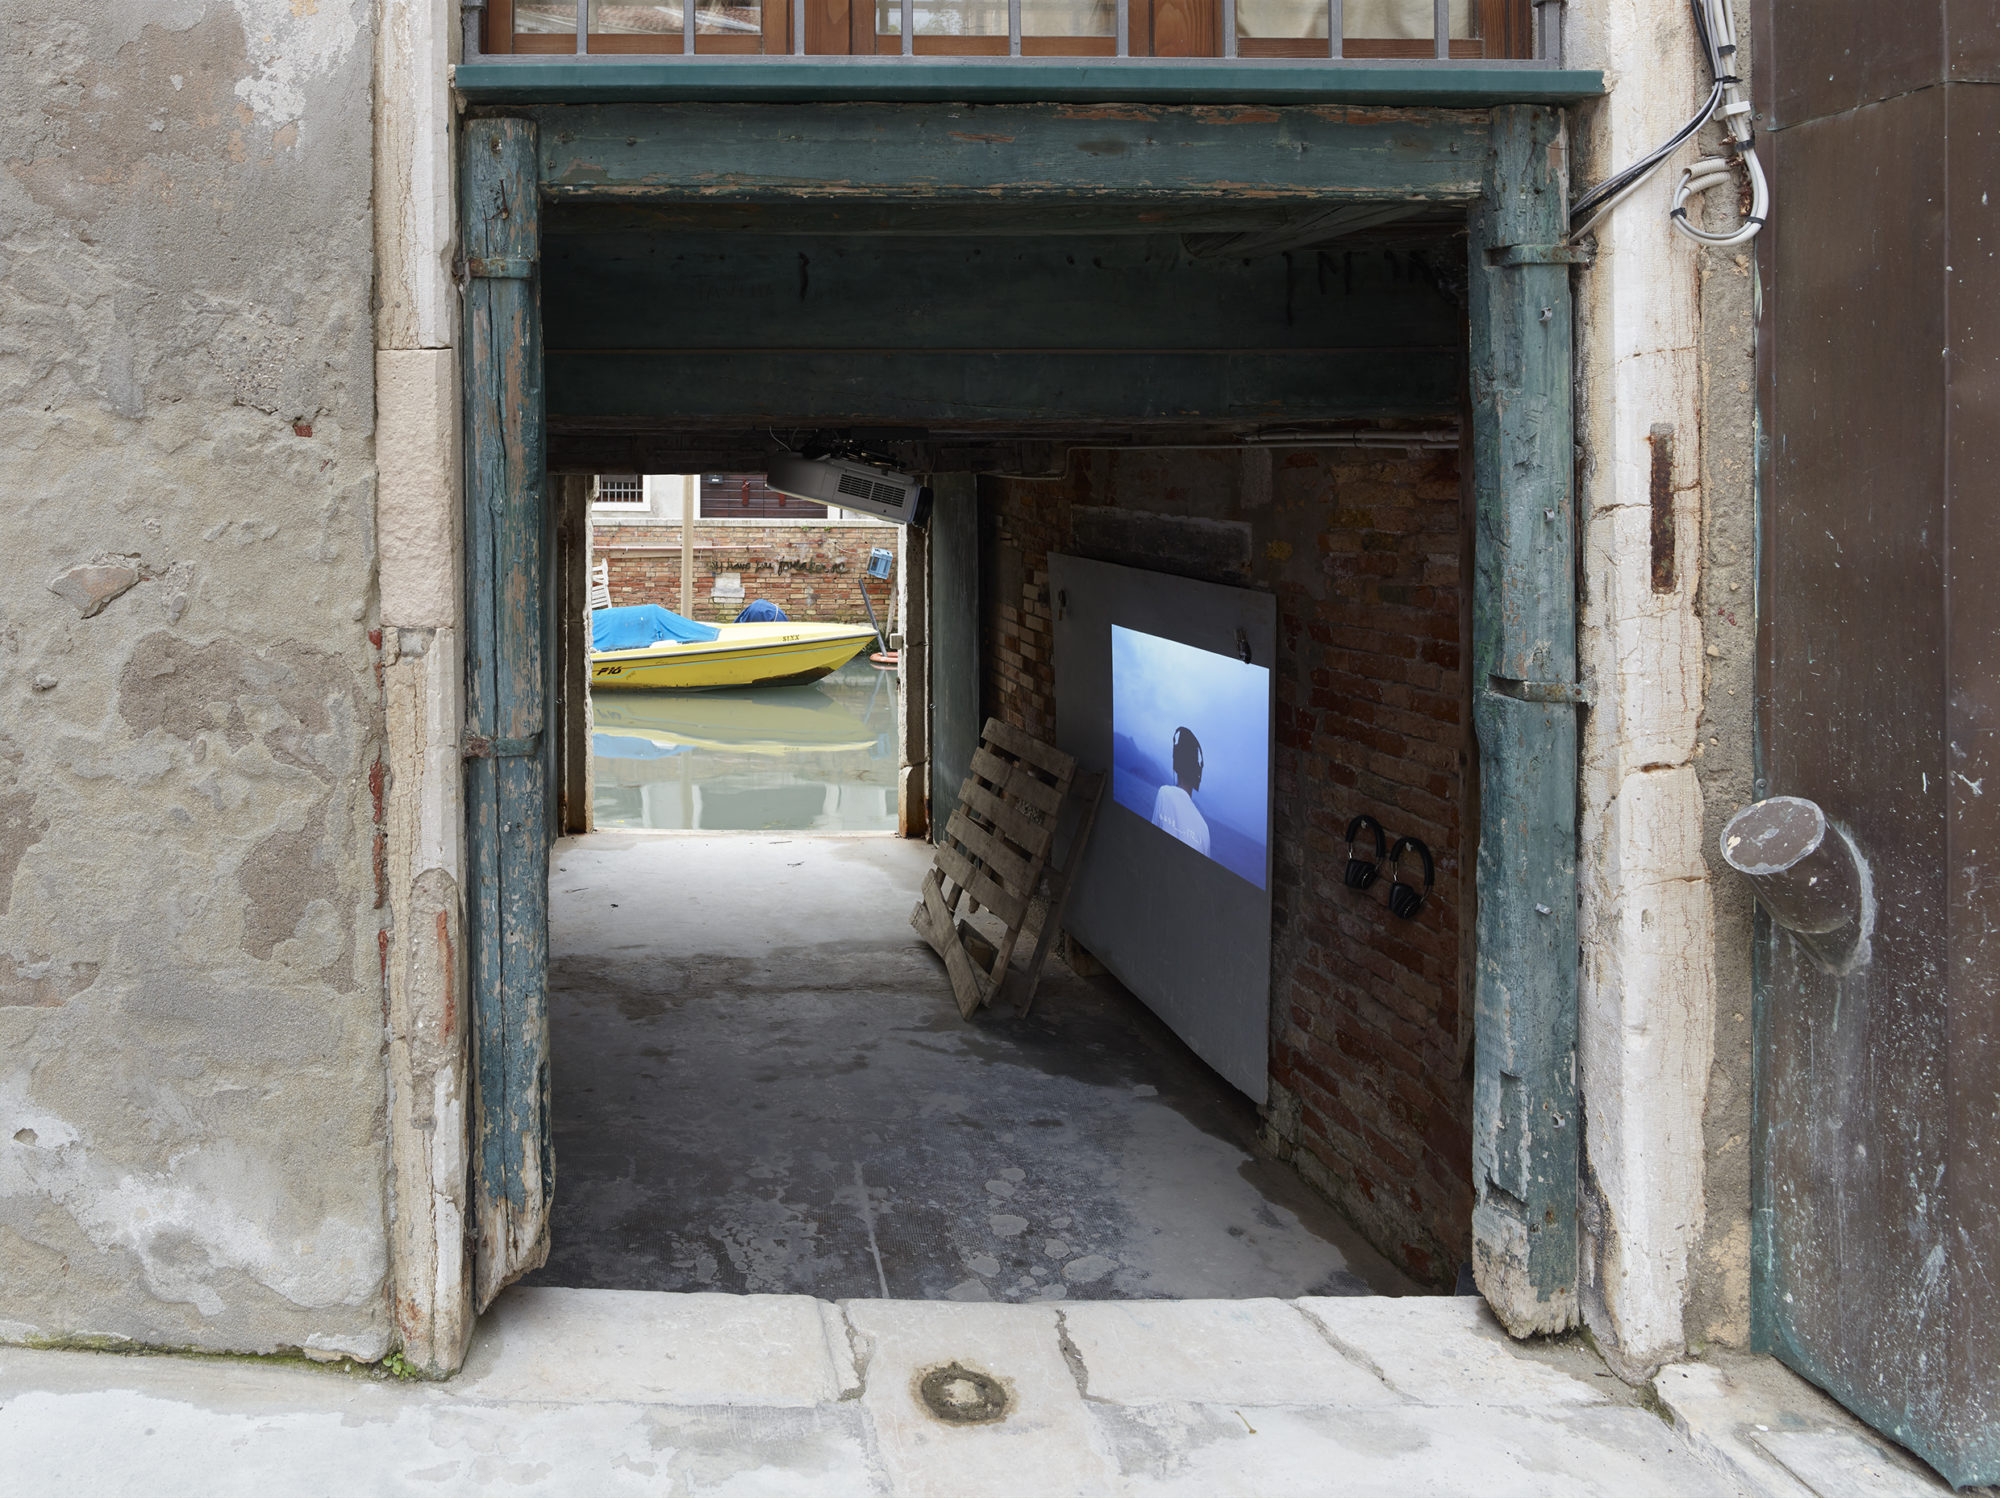 A still from Samson Young's Lullaby (World Music) displayed via projector in an alleyway with a yellow boat floating in the background